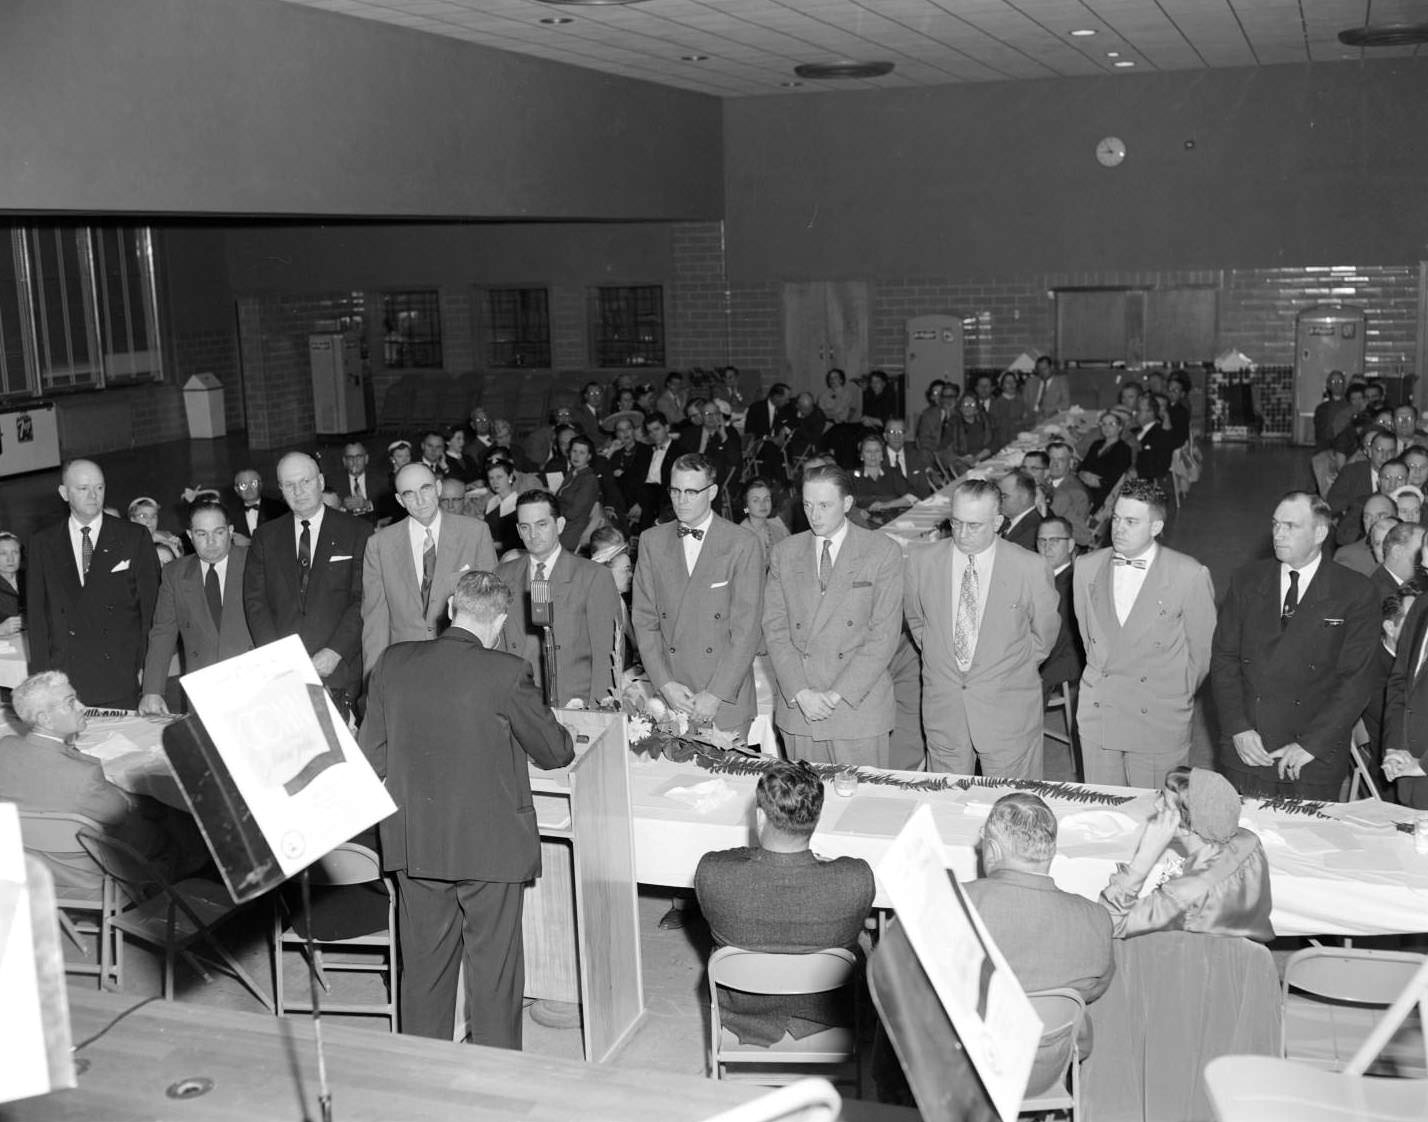 Men and women of the South Austin Civic Club meet for an unknown event, 1955